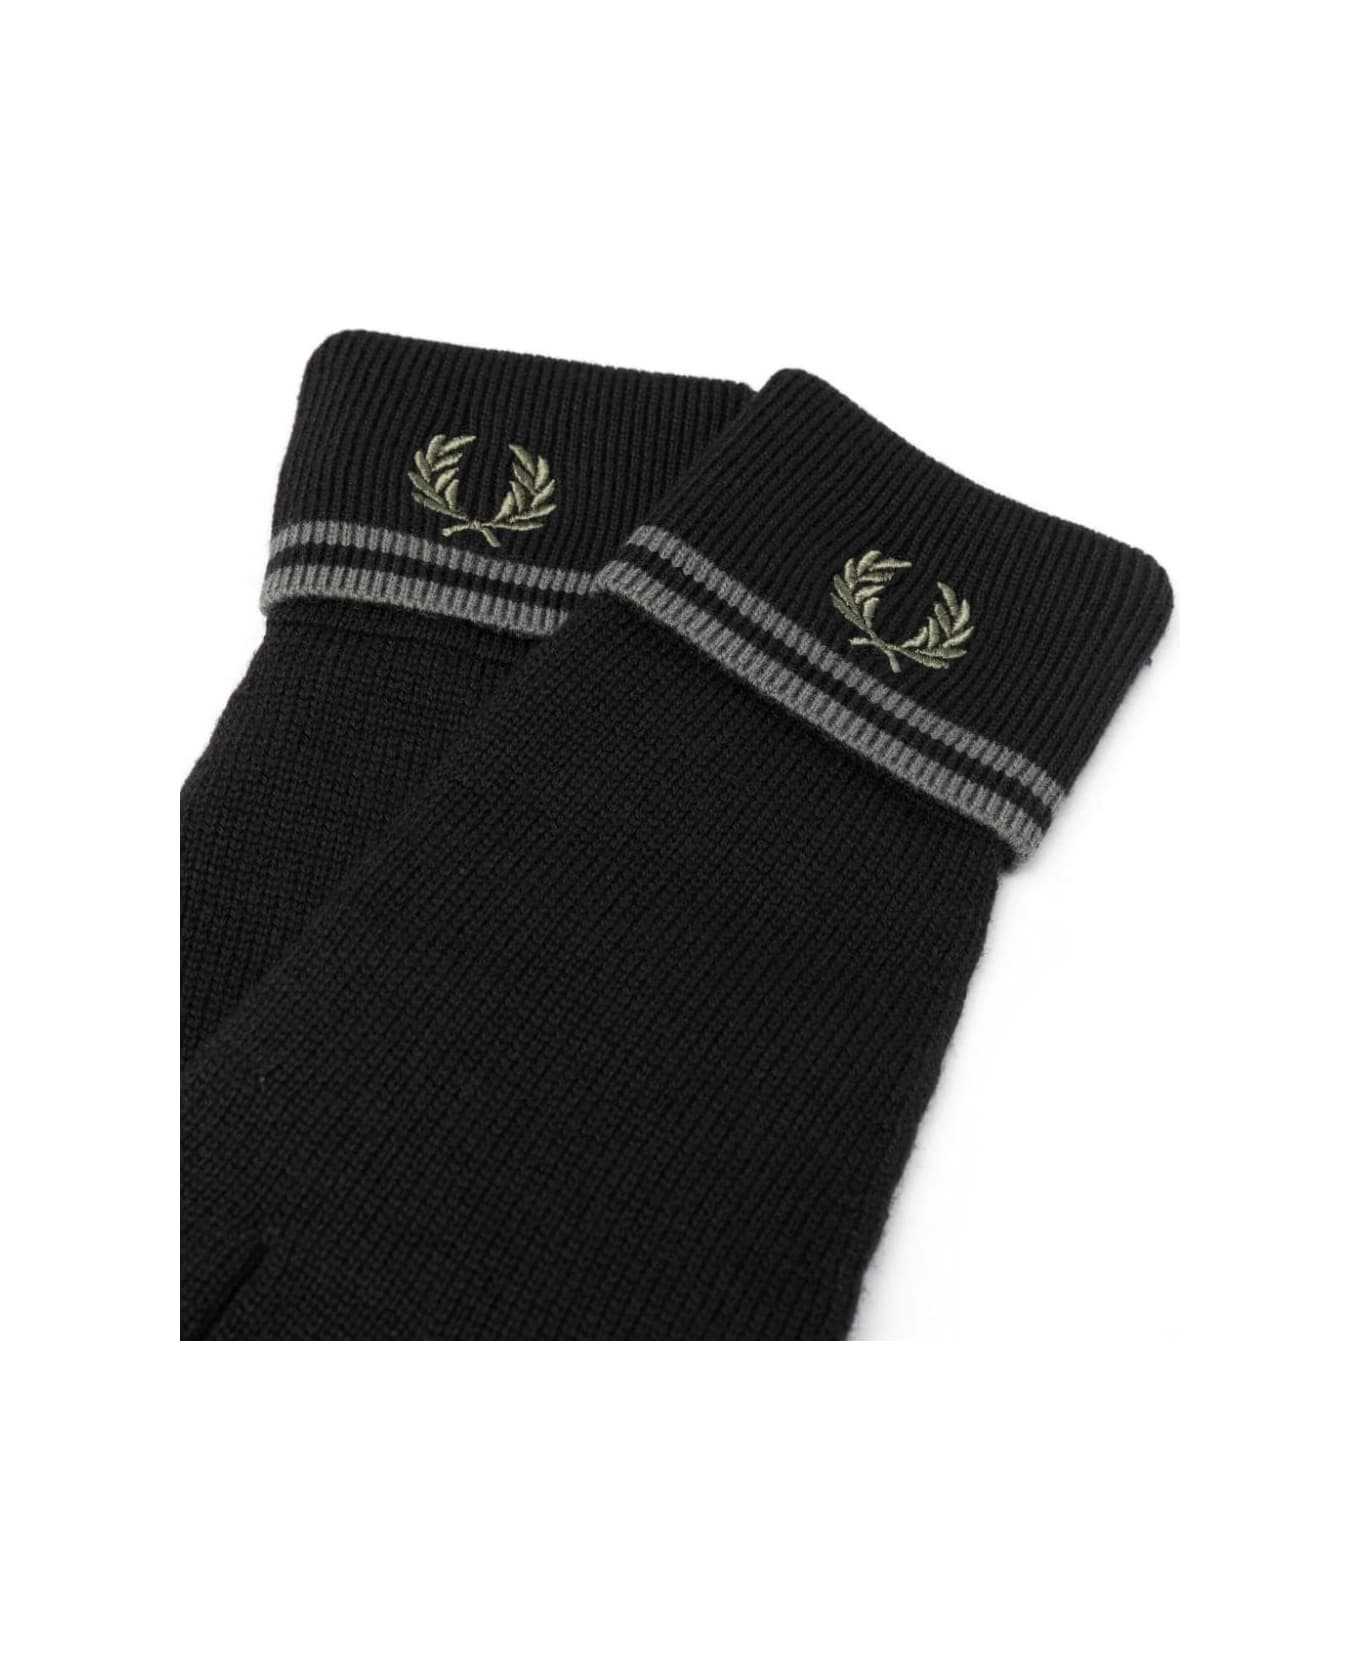 Fred Perry Fp Twin Tipped Merino Wool Gloves - Is JuzsportsShops legitimate